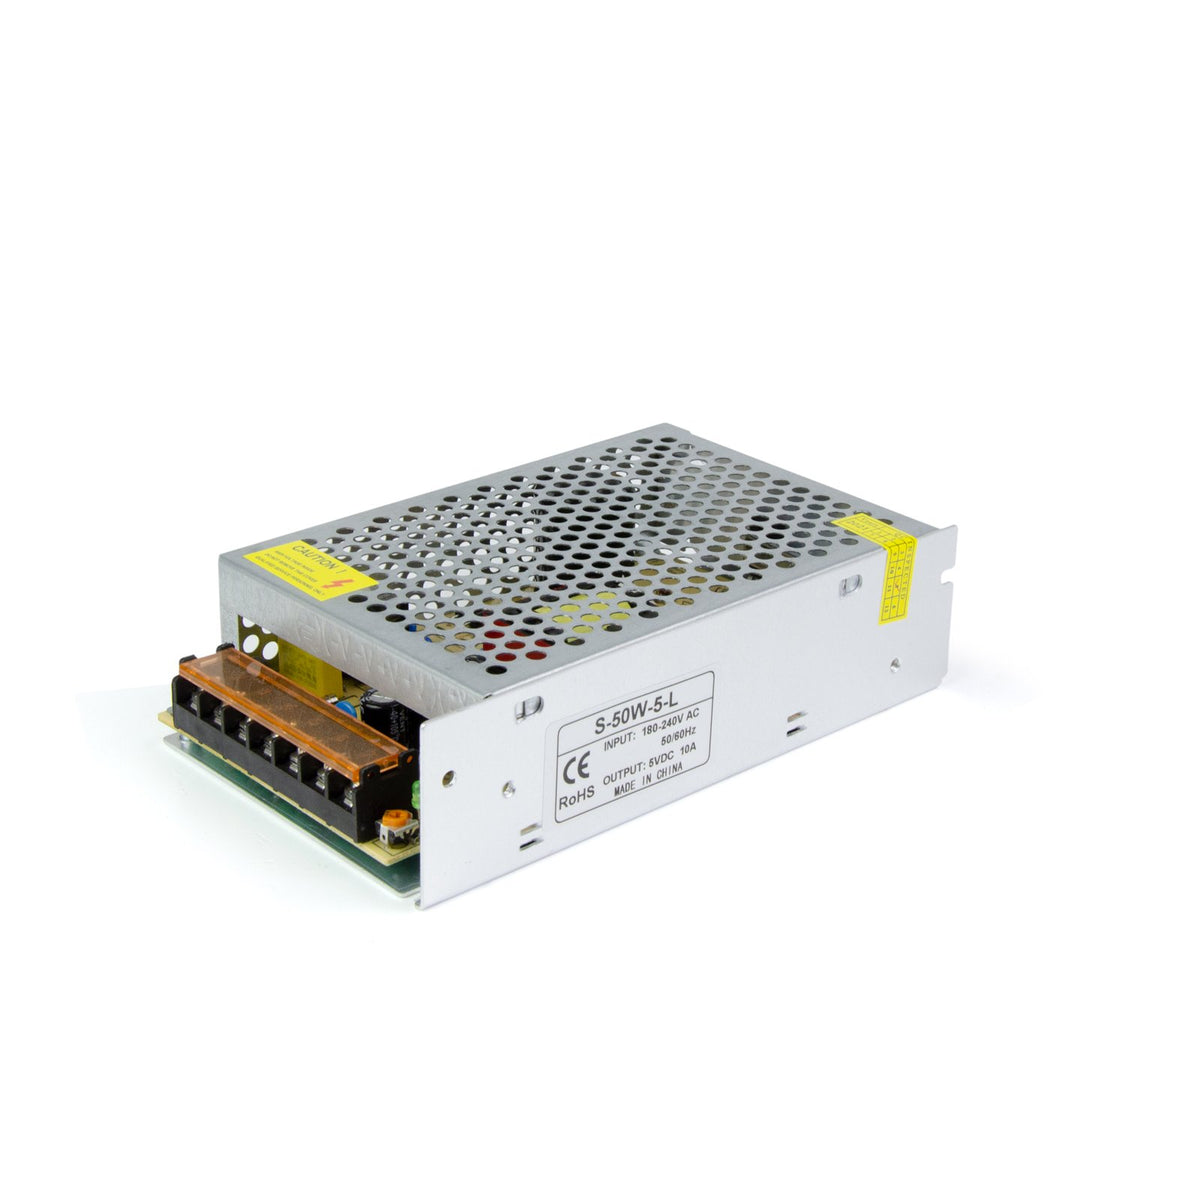 G.W.S LED Wholesale LED Drivers/LED Power Supplies IP20 (Non-Waterproof) 5V 10A 50W LED Driver